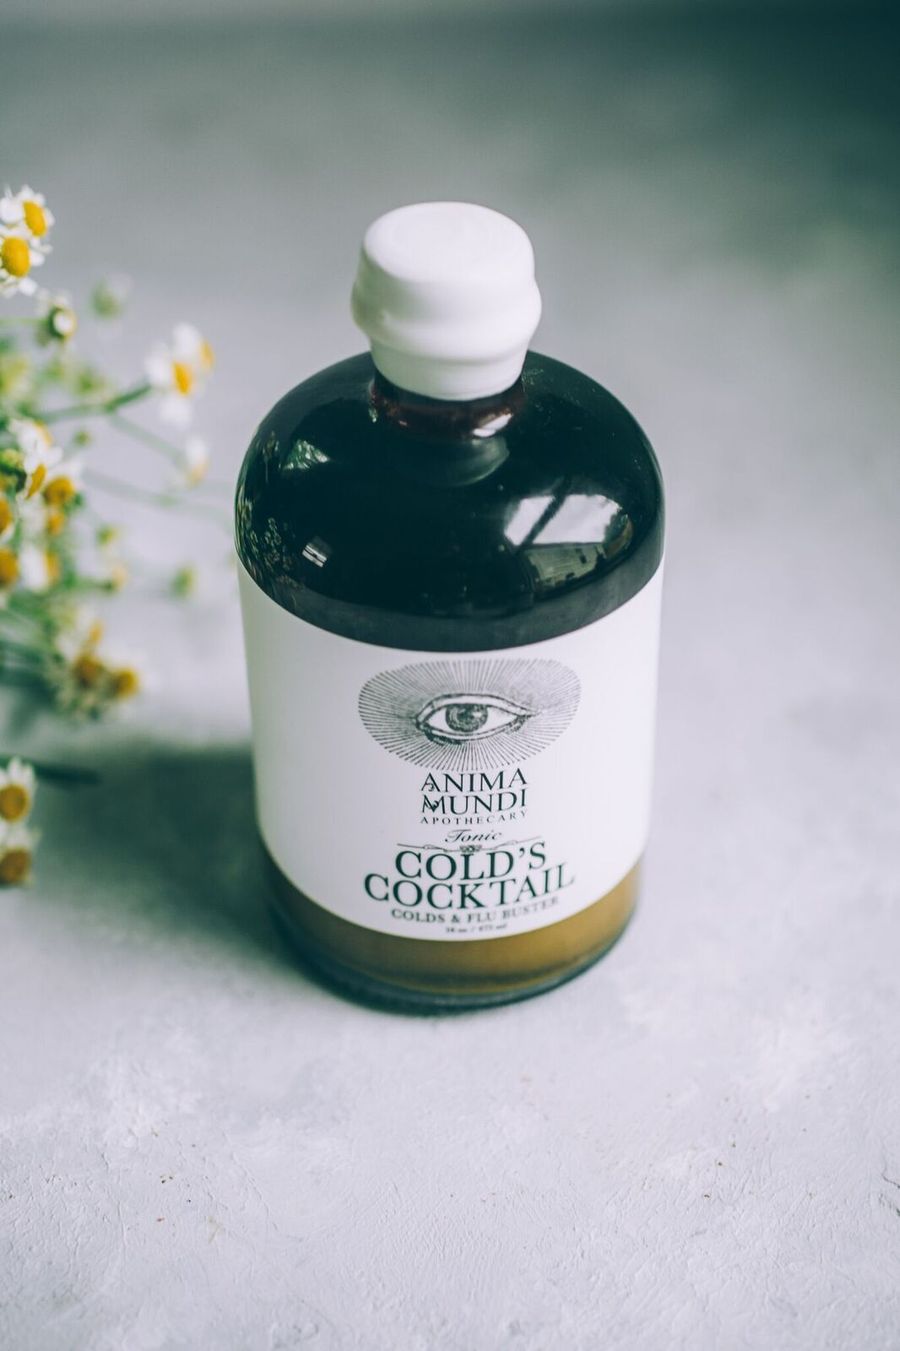 Cold's Cocktail: High Potency Colds & Flu Tonic North Glow